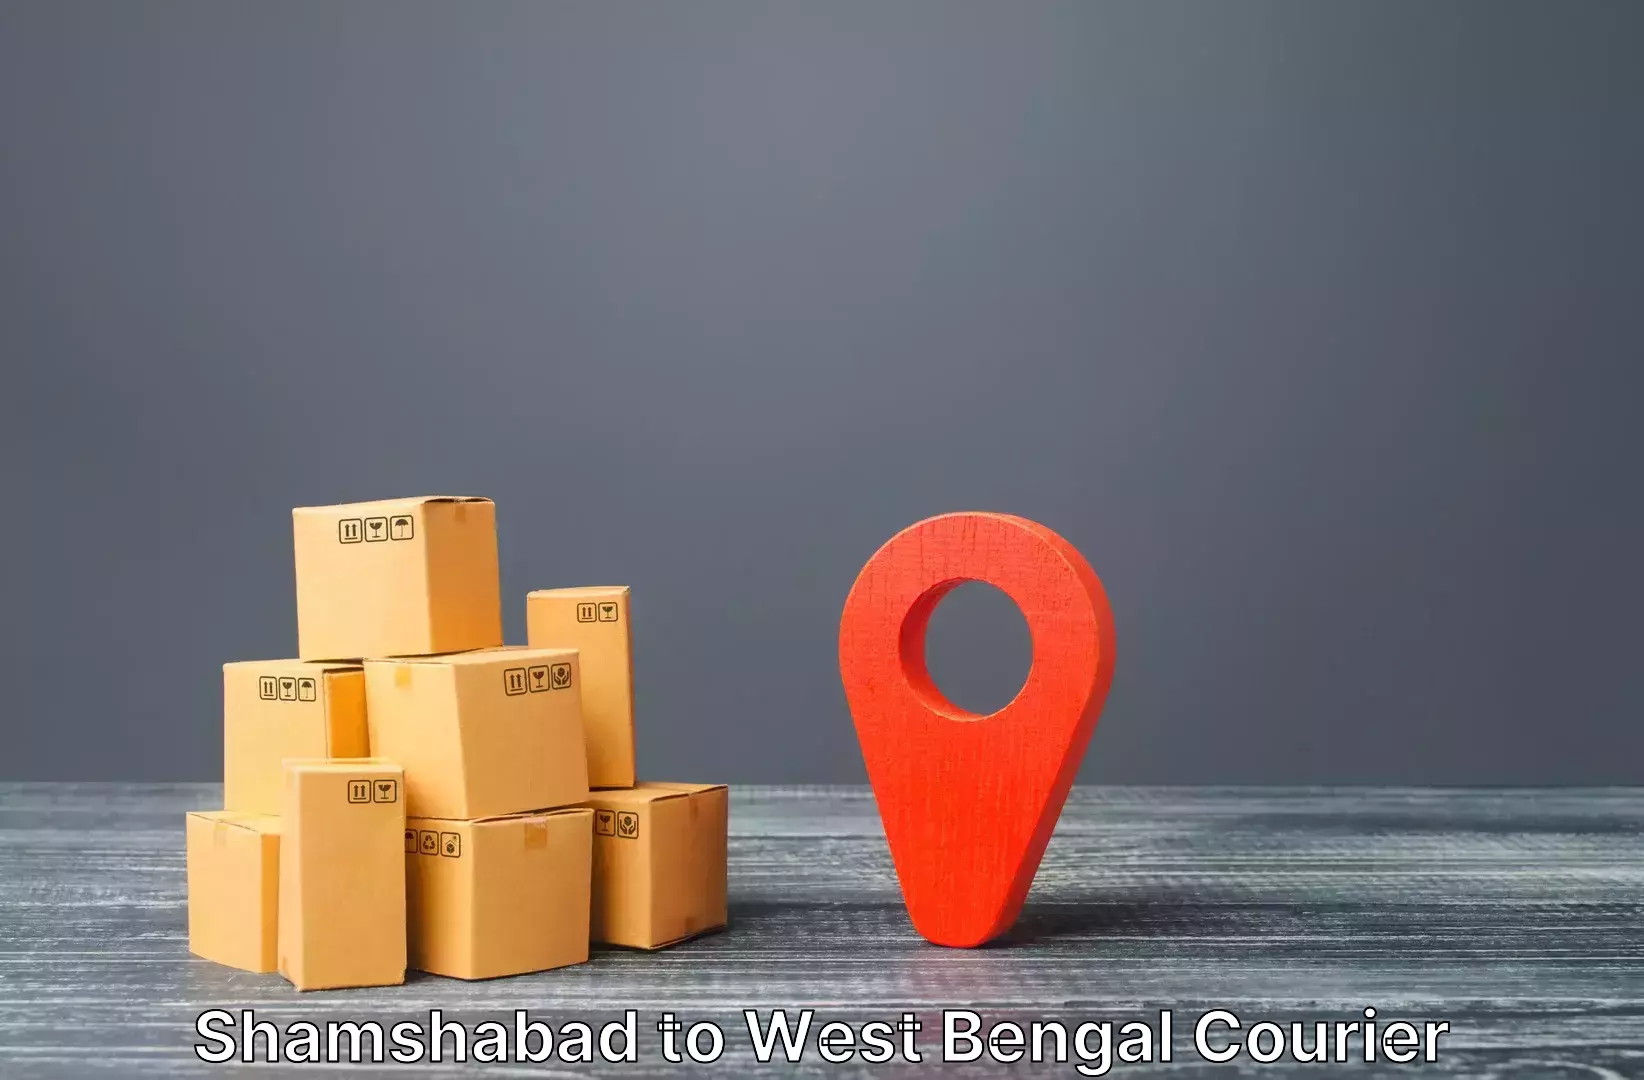 Luggage delivery app Shamshabad to West Bengal